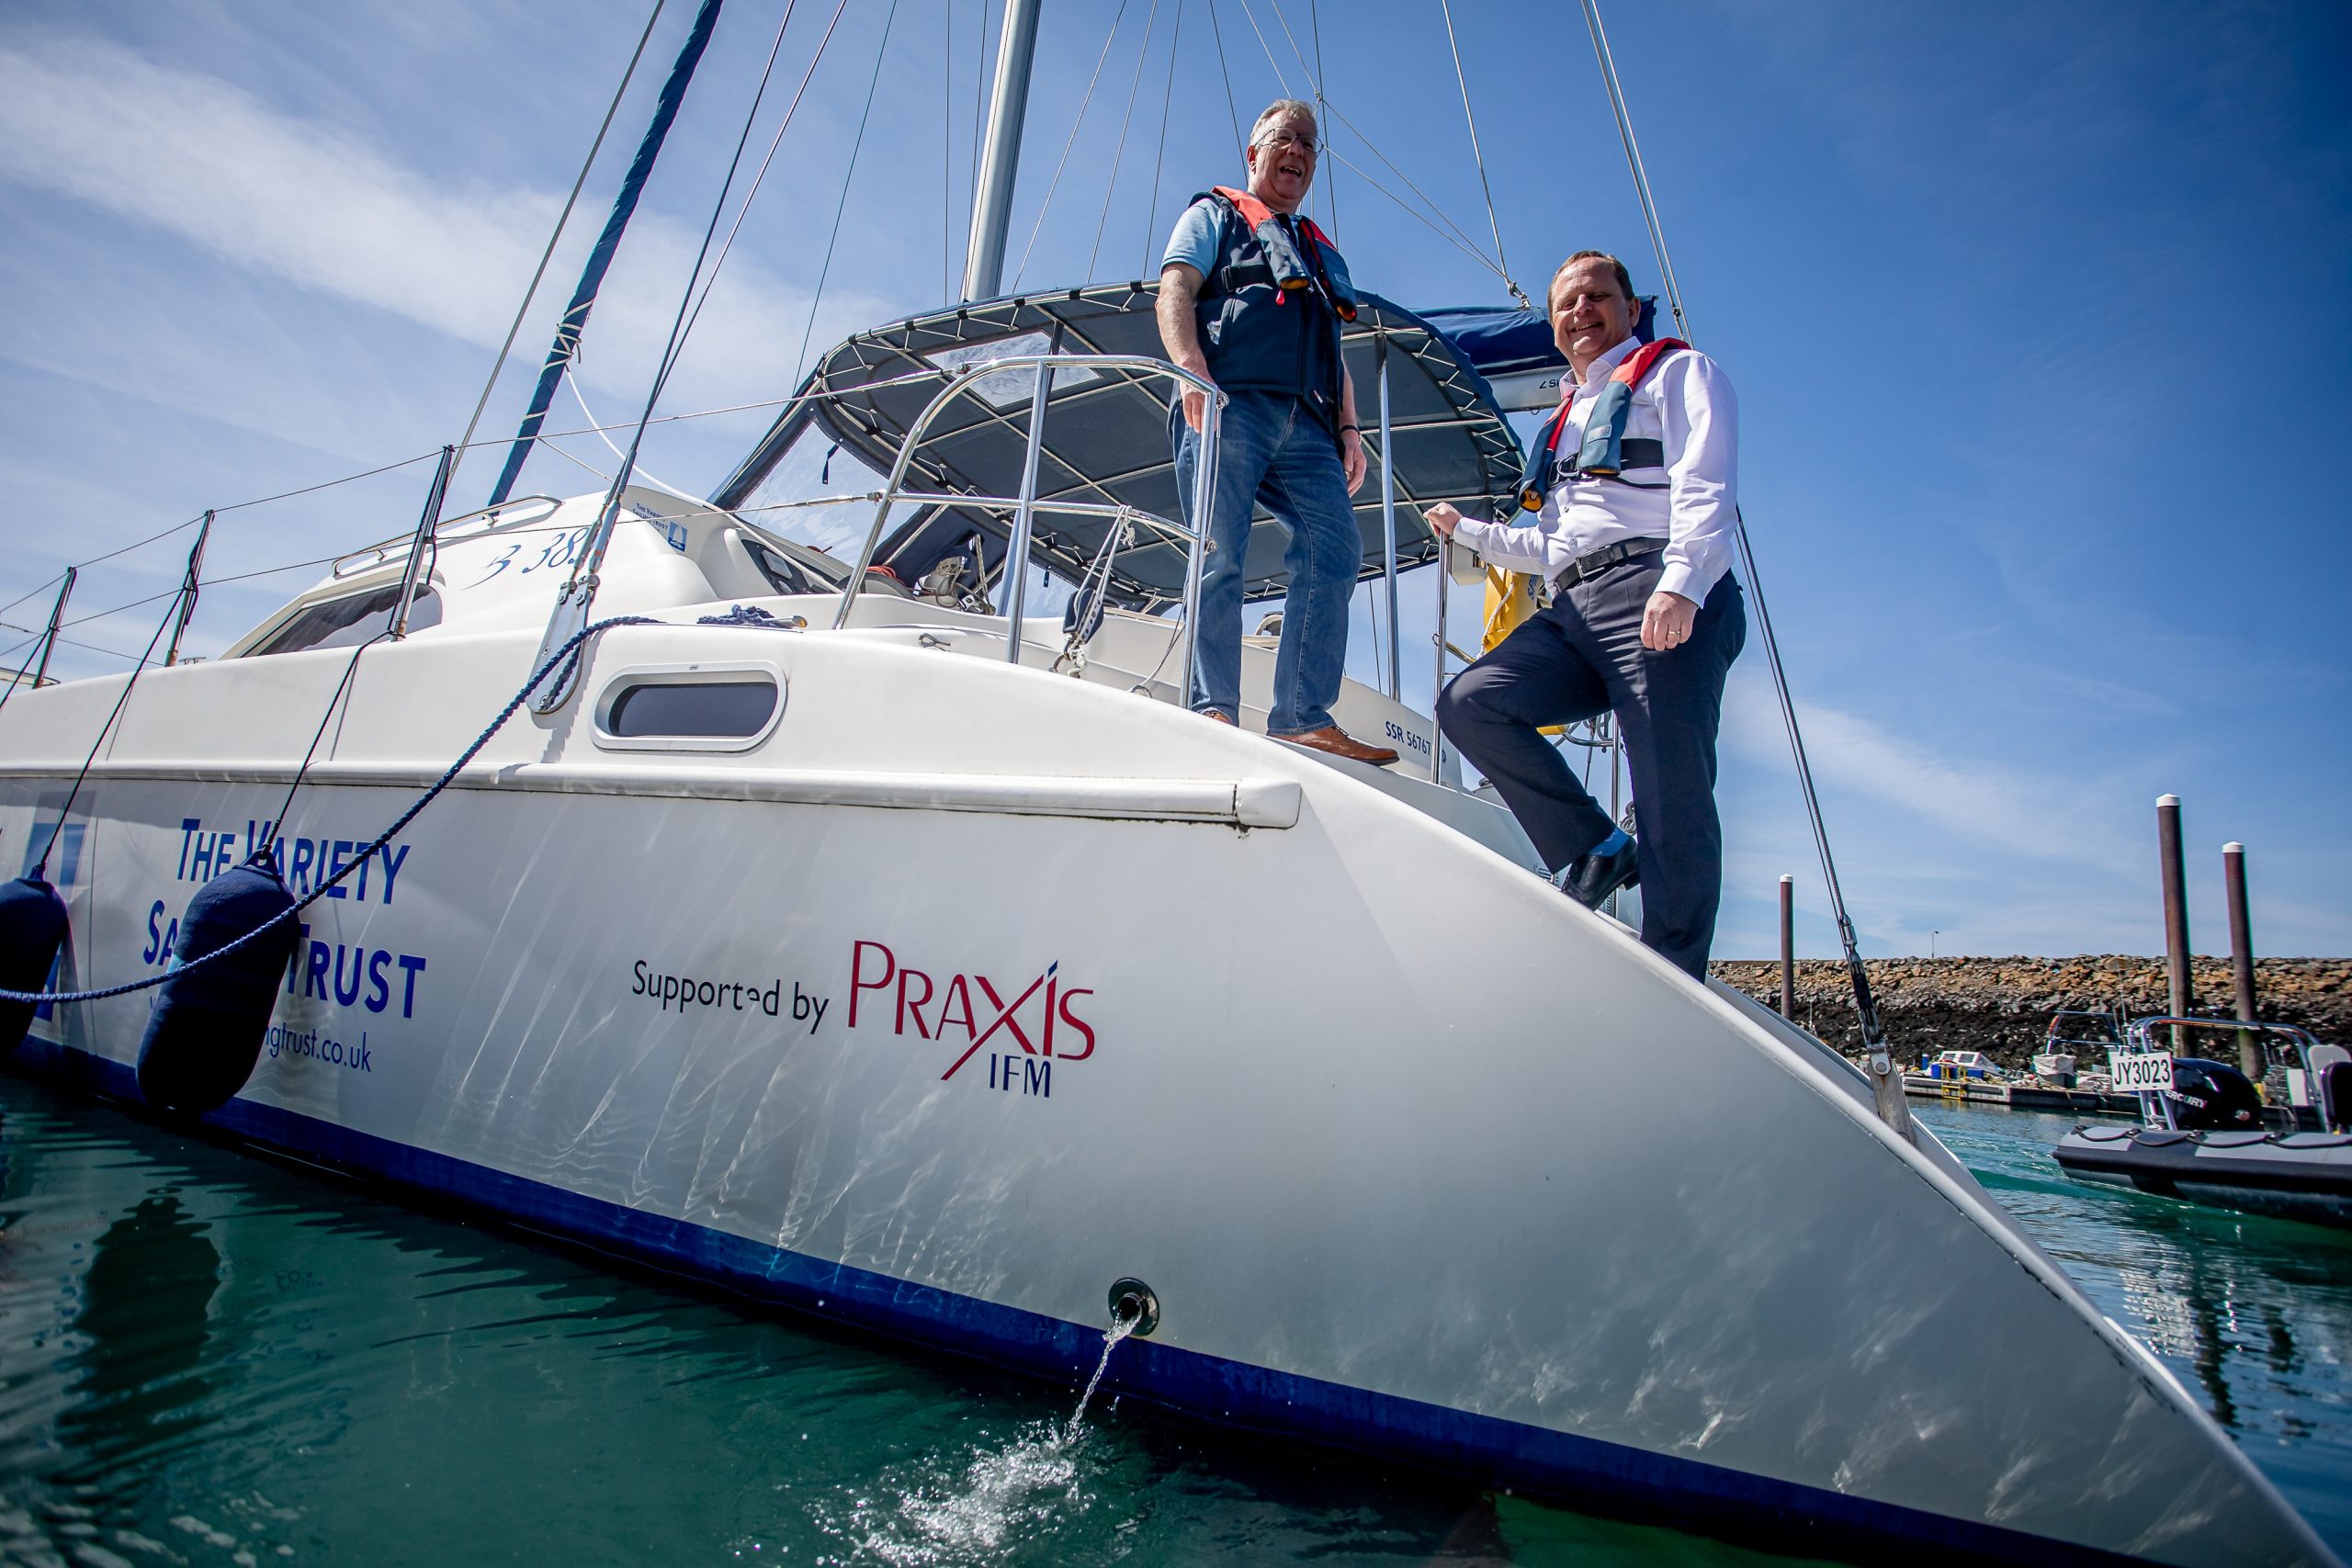 Two men stood on a sailing boat with life jackets on. The boat is in the water and has the PraxisIFM logo printed on it